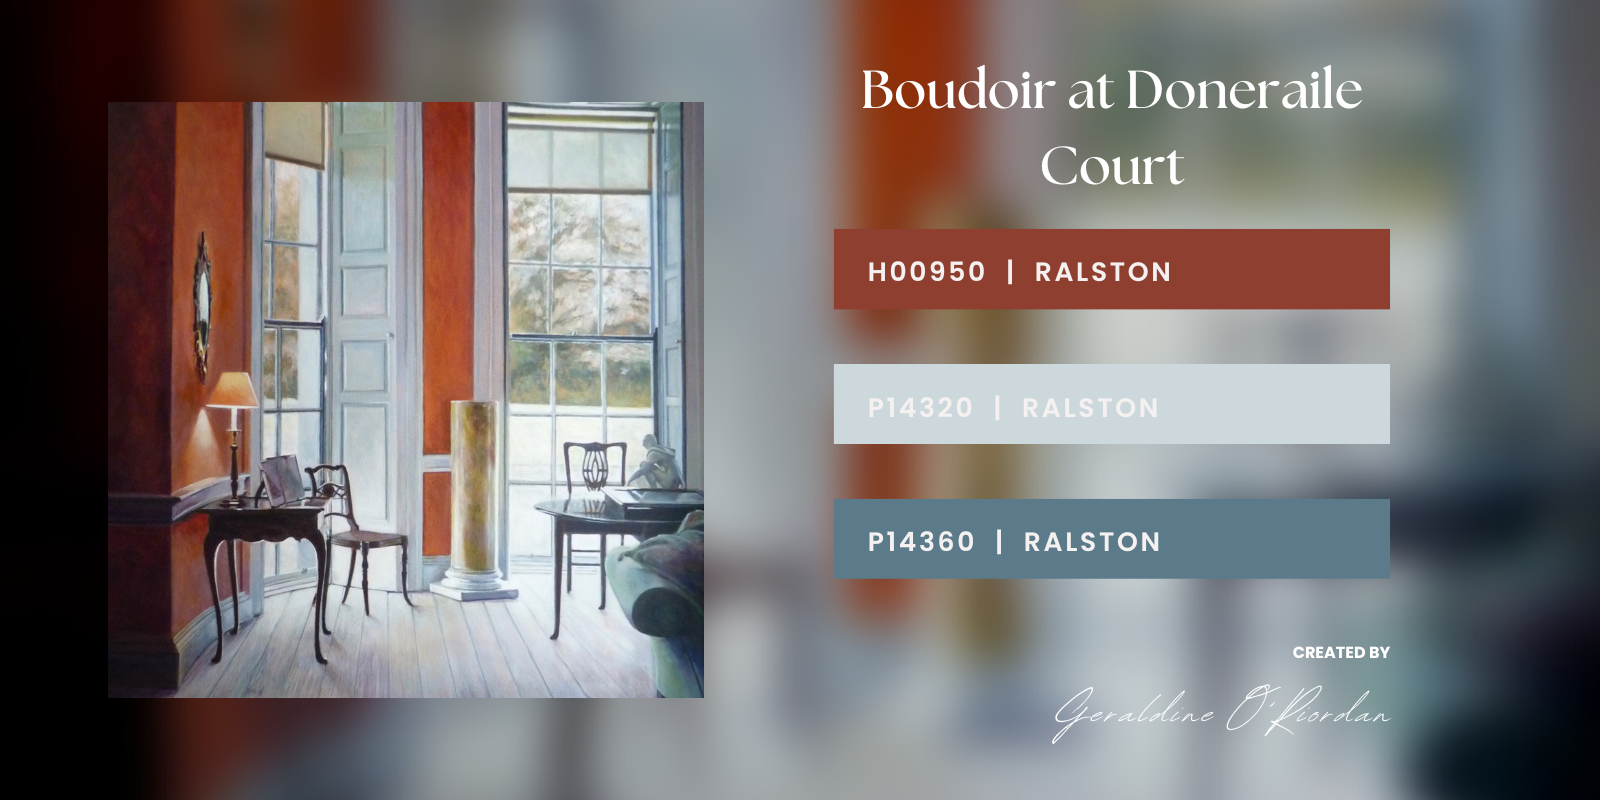 Colour Palette Inspired by "Boudoir at Doneraile Court" by Geraldine O'Riordan